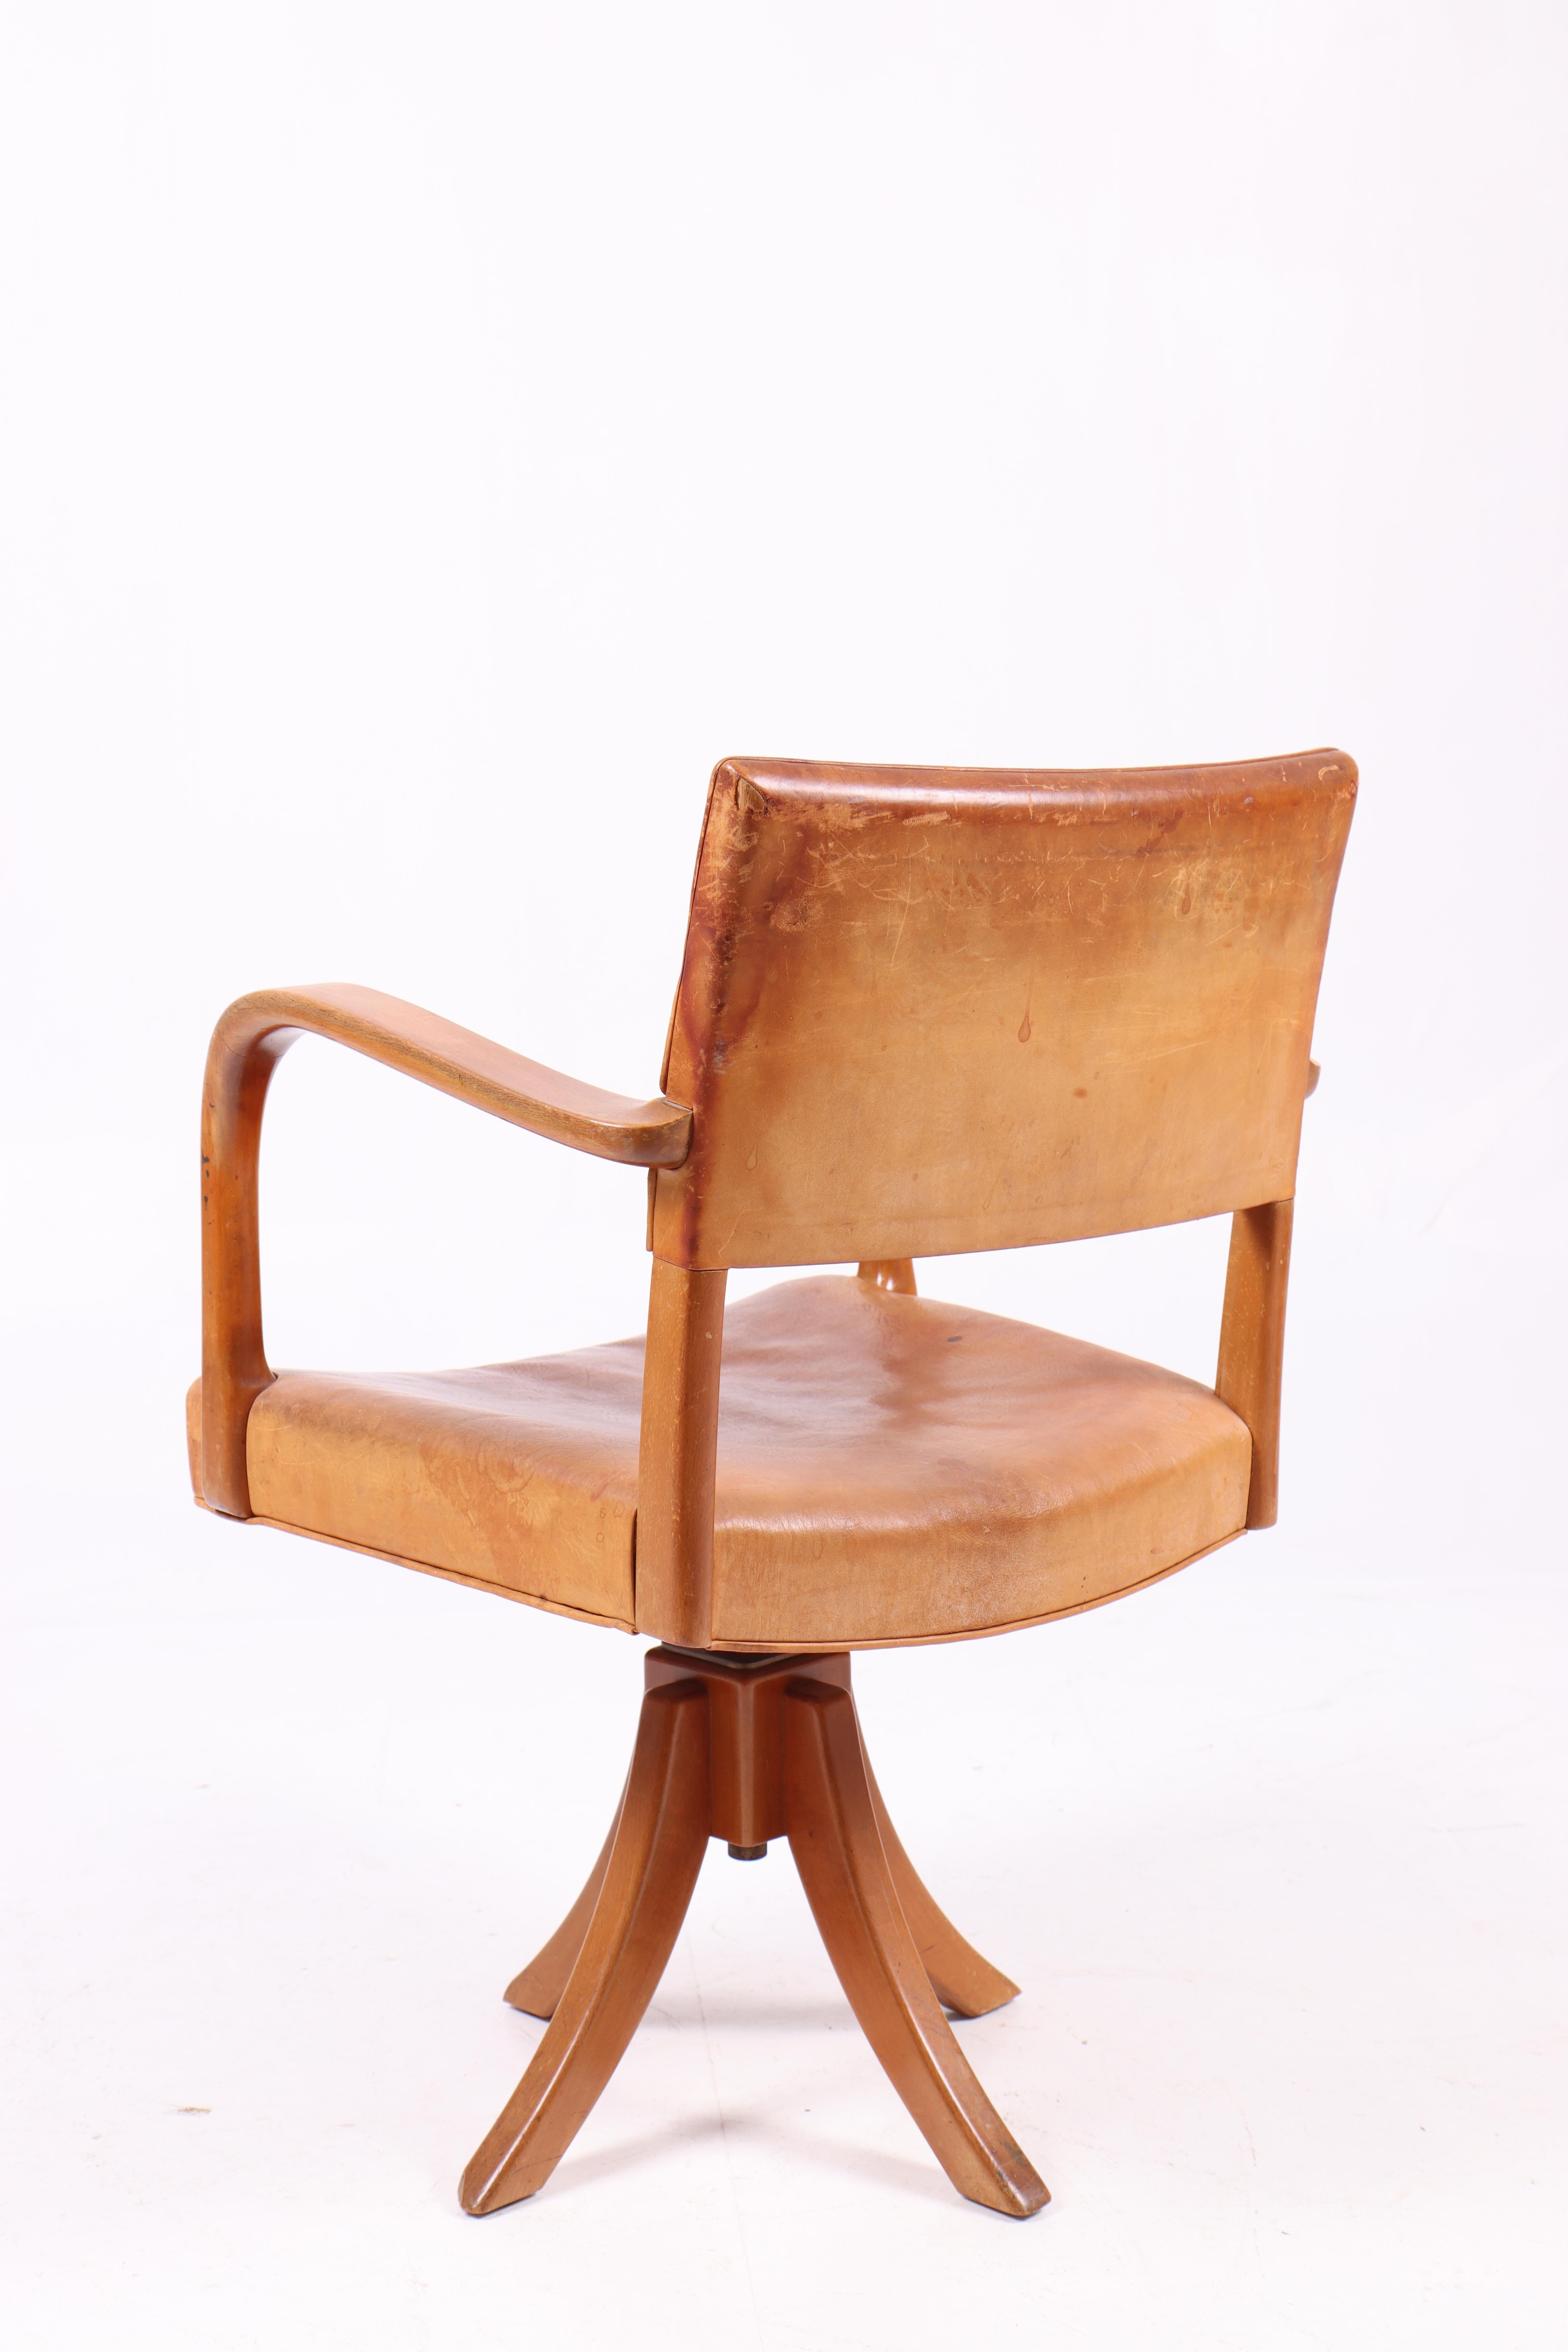 Scandinavian Desk Chair in Patinated Leather by Danish Cabinetmaker 1940s For Sale